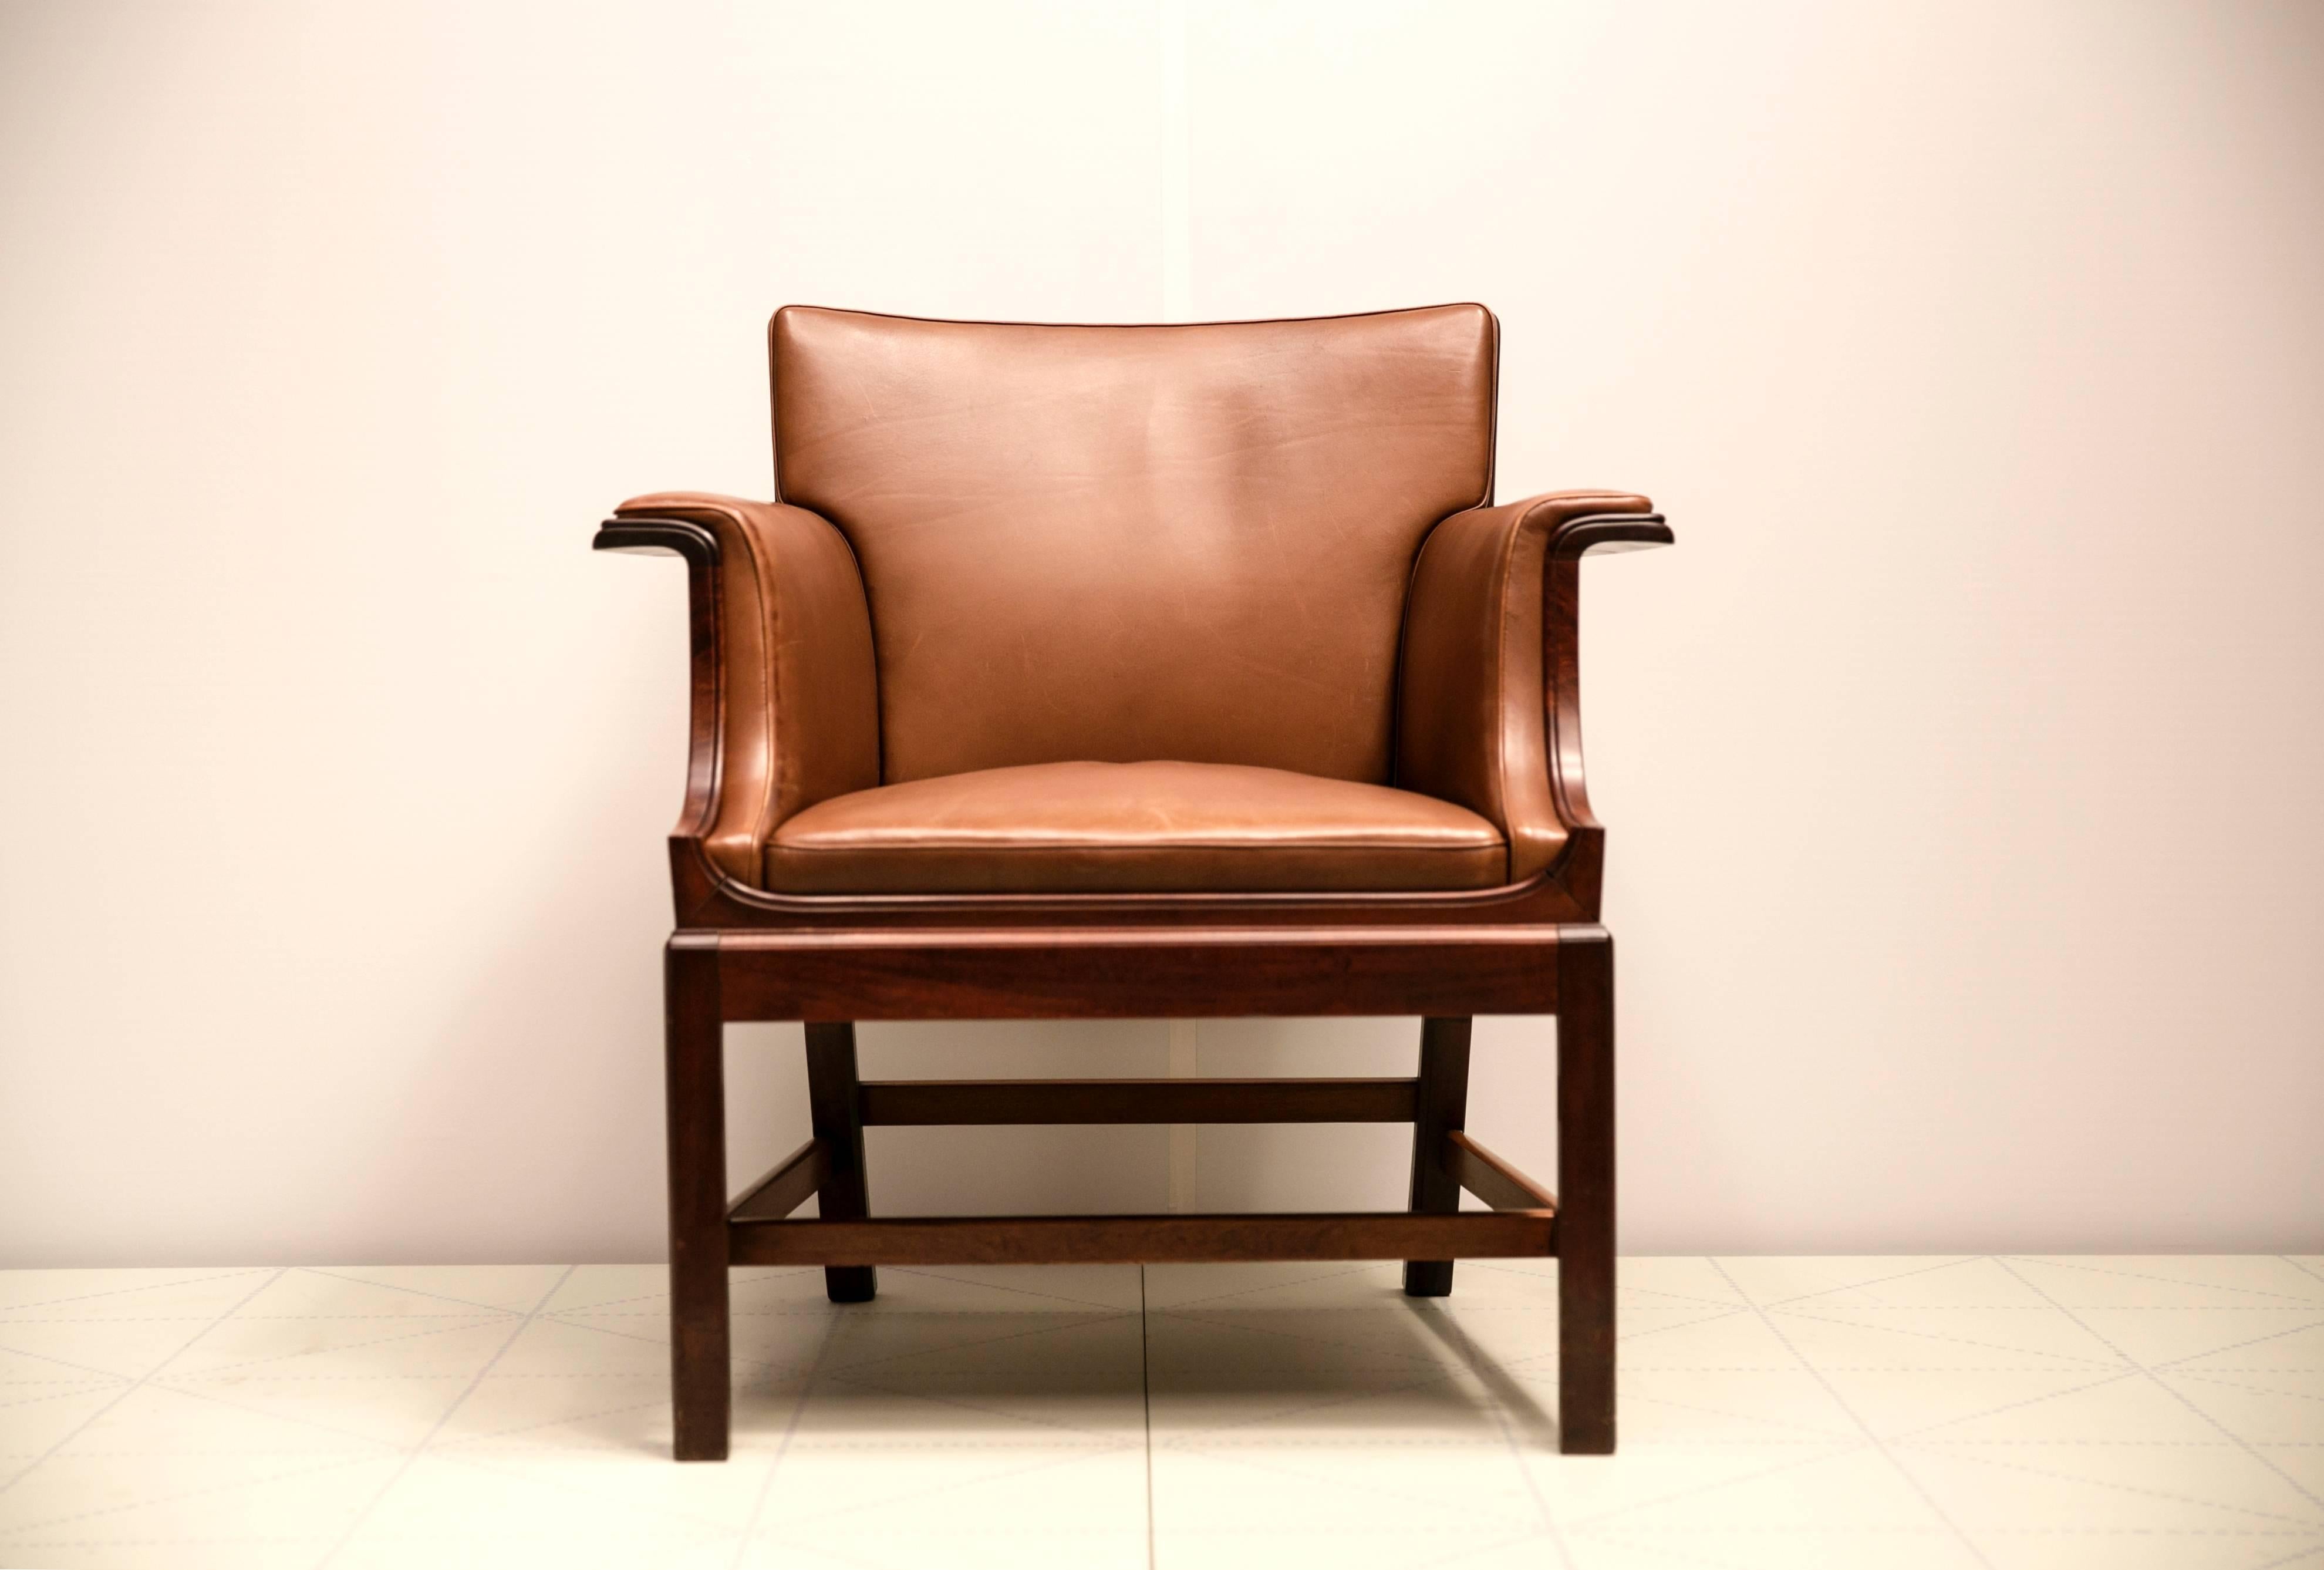 Armchair in Cuban Mahogany by Ole Wanscher. 

Cabinetmaker C.B. Hansen, with metal cabinetmaker’s label on the underside of the frame.

Designed in 1929 and made shortly thereafter.

Provenance:
Made for the Society of Merchants Chairman’s Room at